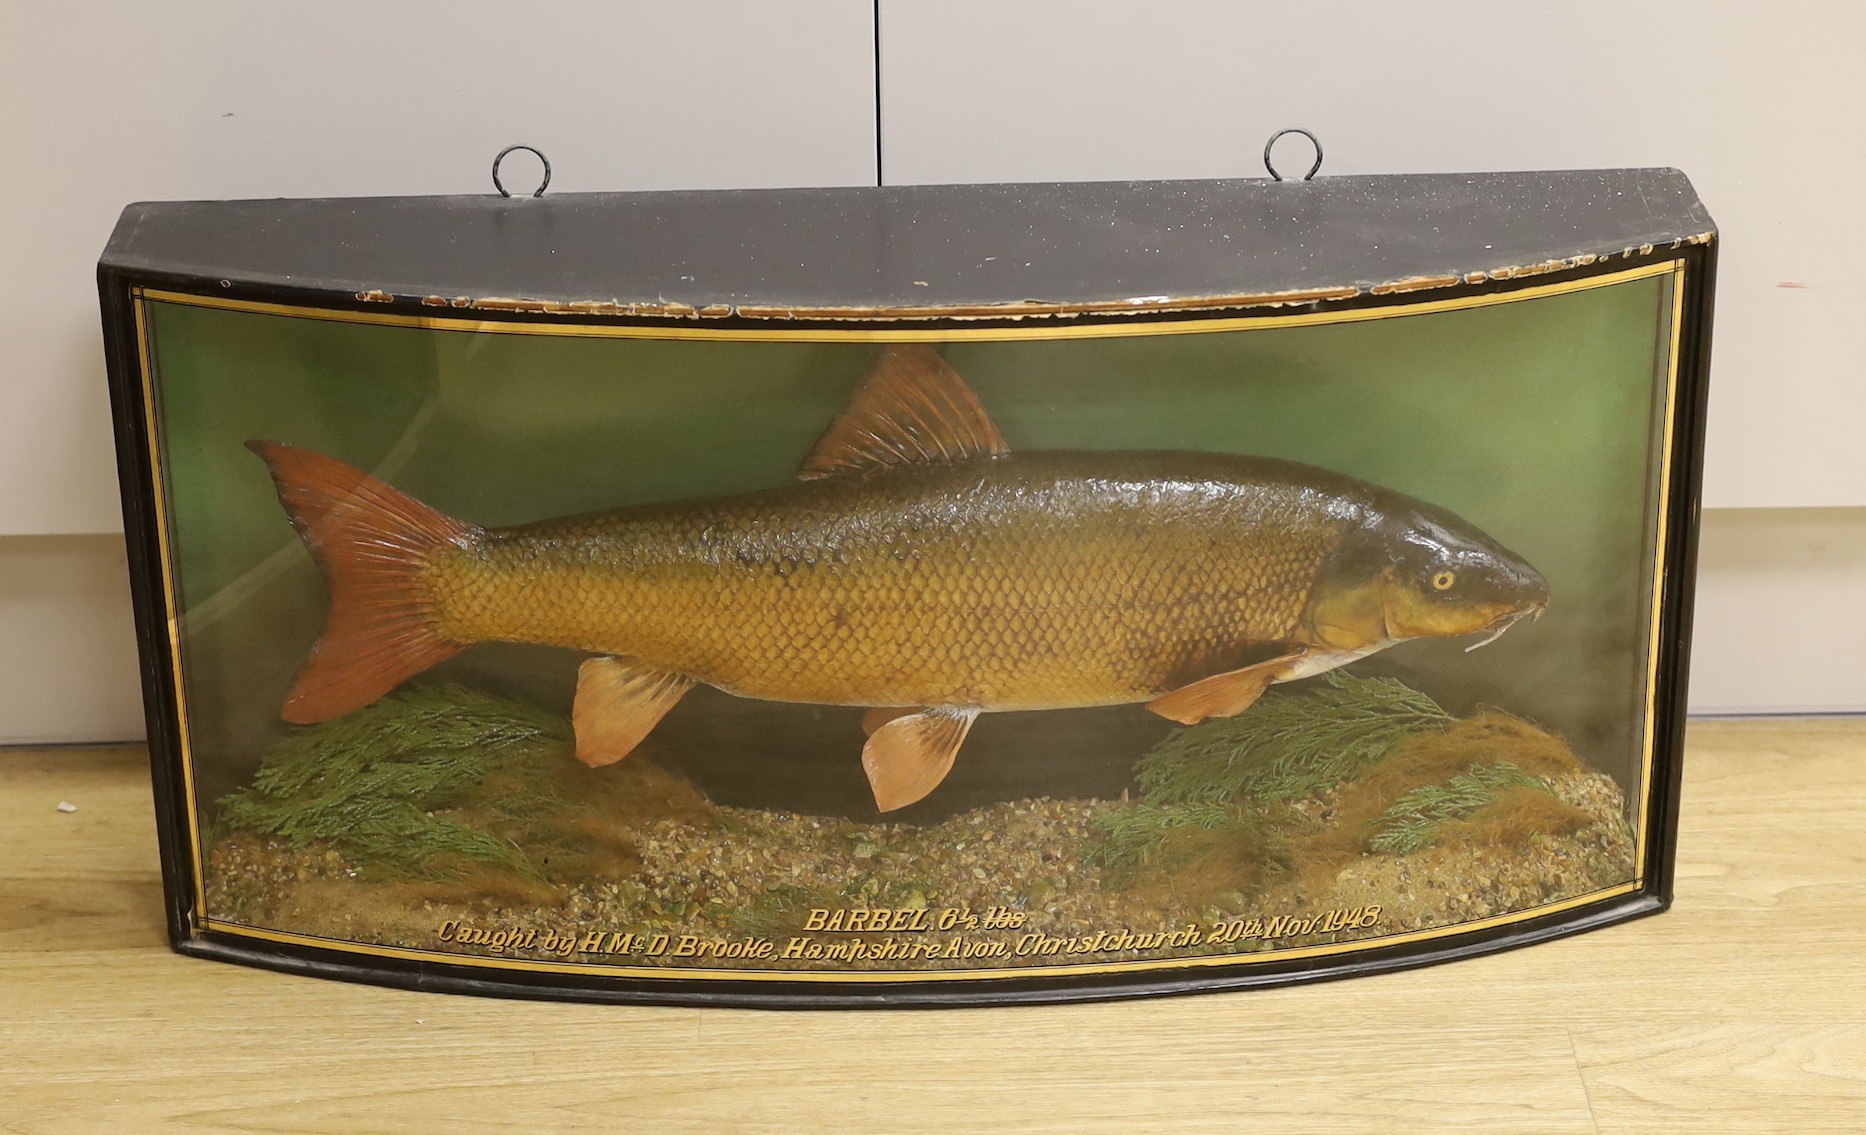 A cased taxidermic barbel, 1948, caught by H. Mc.D Brooke, Christchurch, preserved by J. Cooper & Son, Hounslow